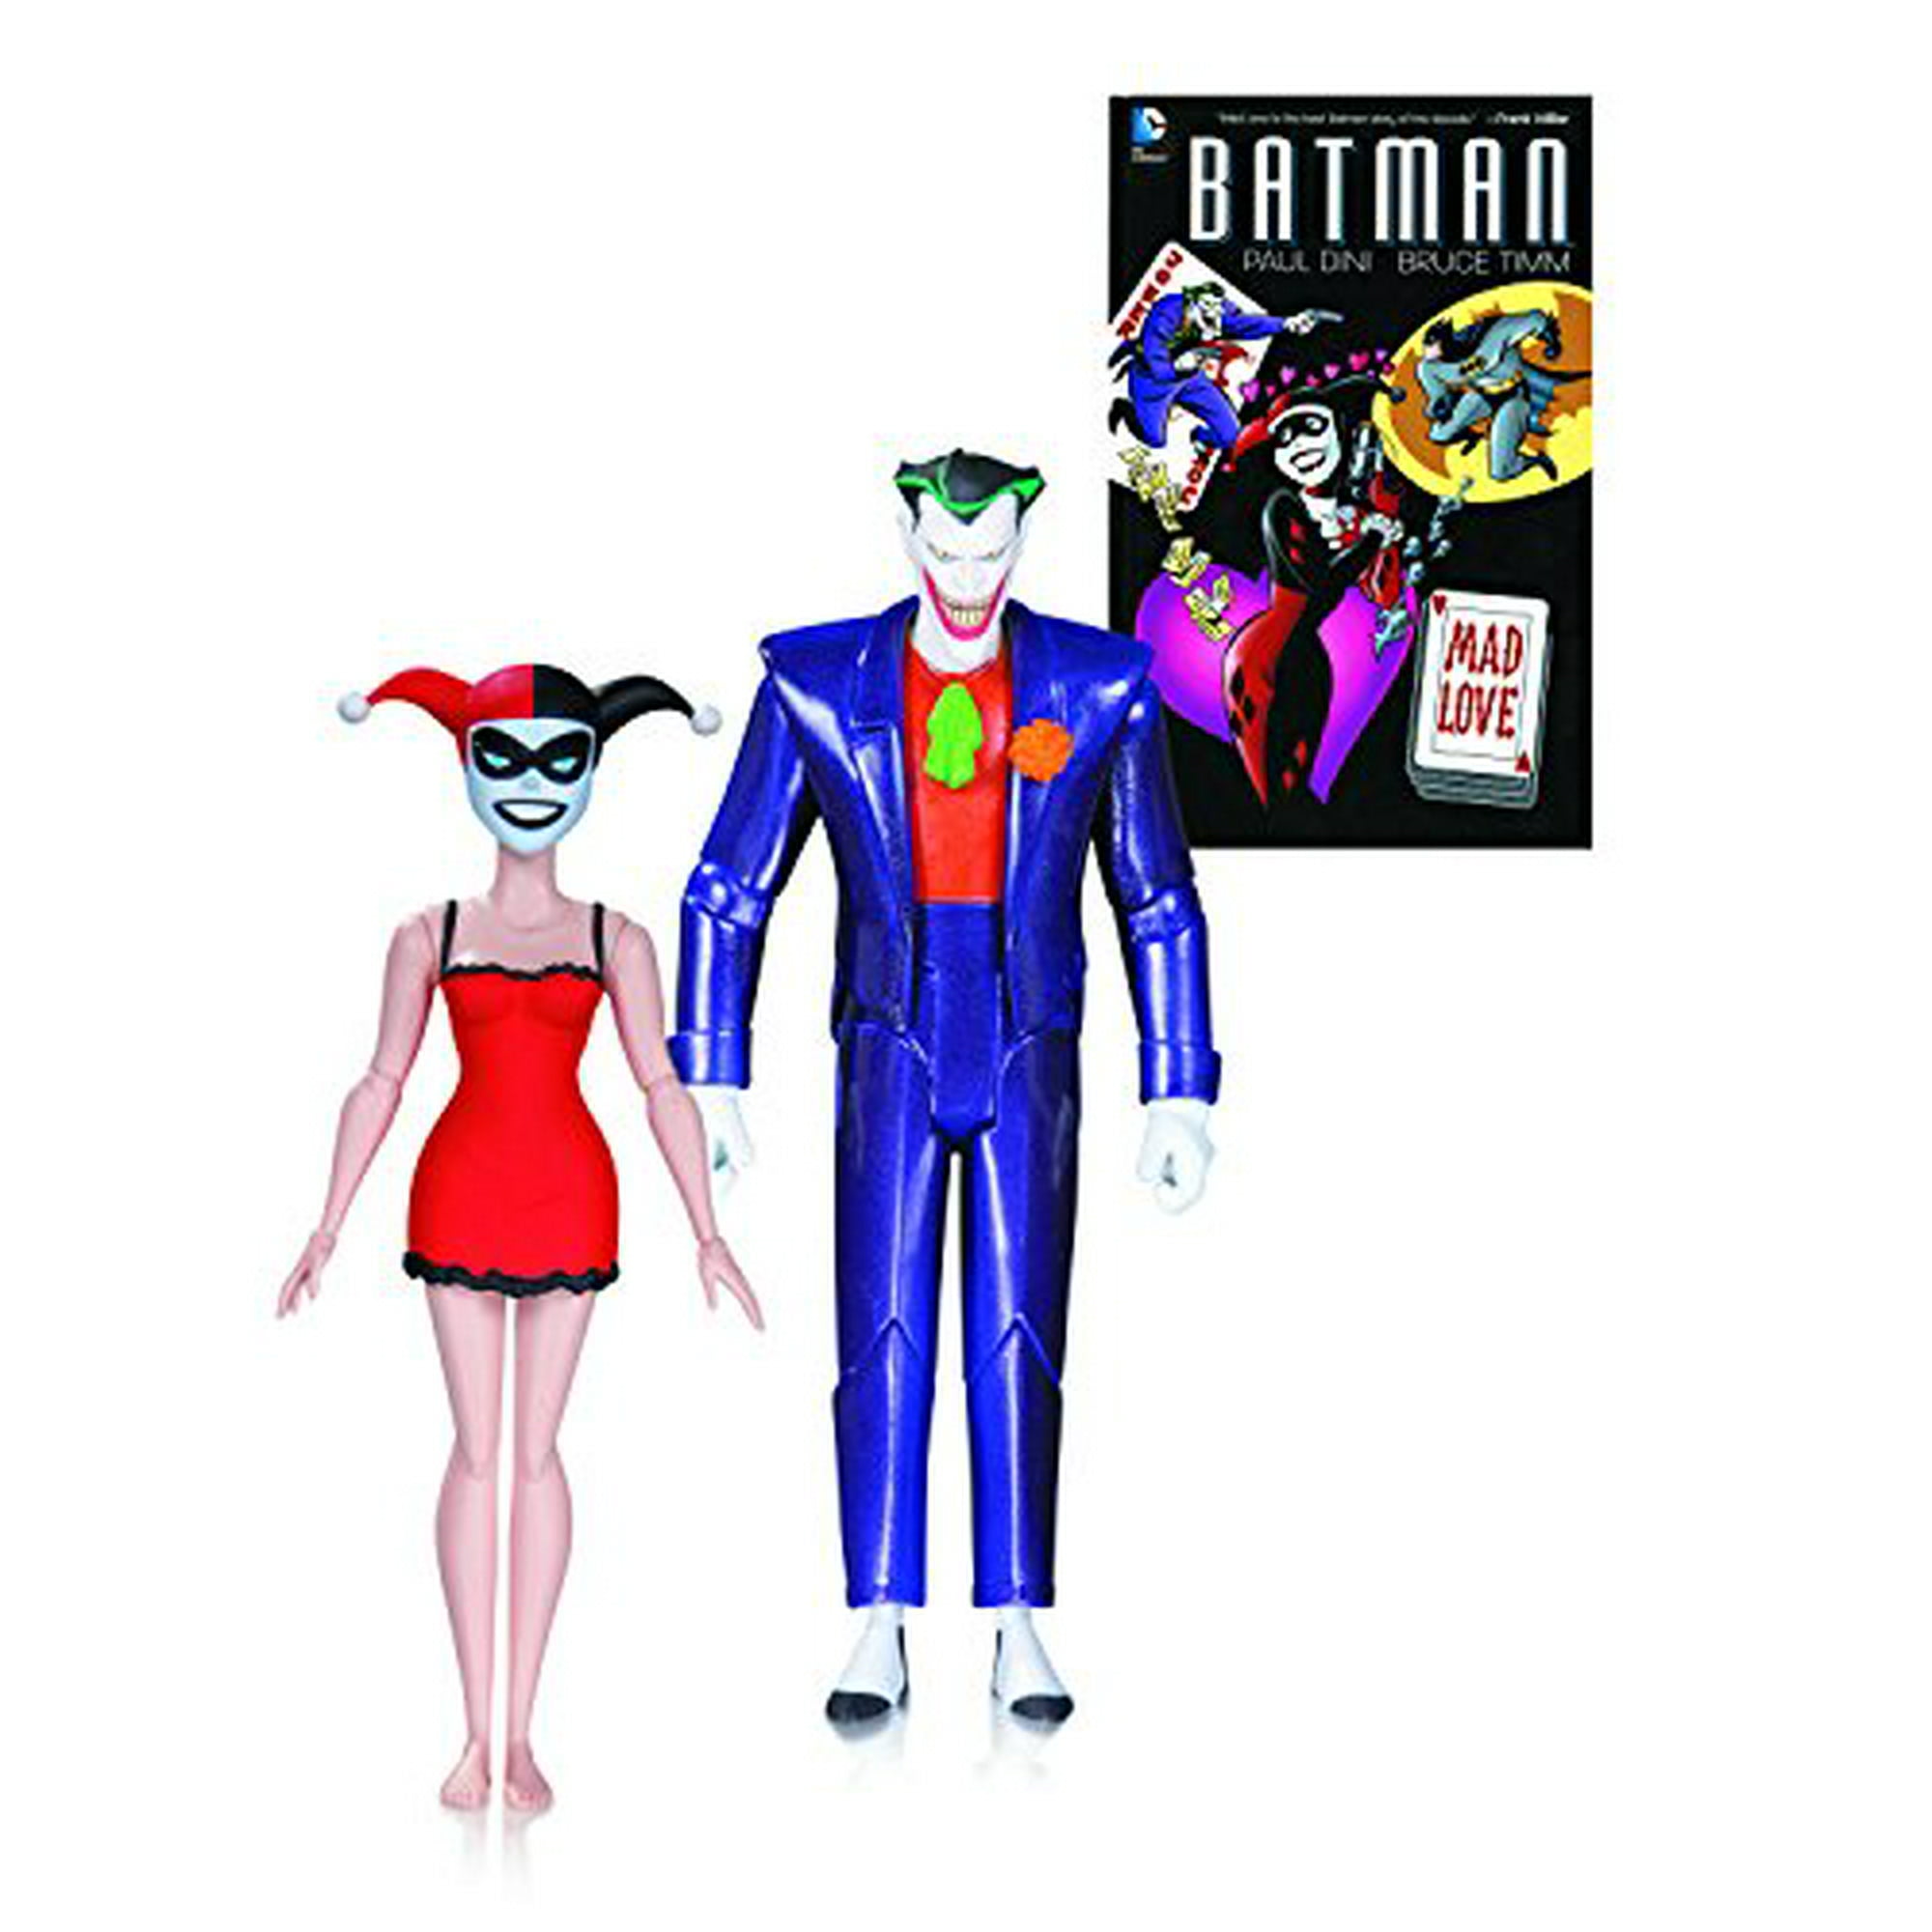 Dc collectibles Batman Animated Series: The Joker Harley Quinn Mad Love  Book Action Figure (2 Pack) | Walmart Canada